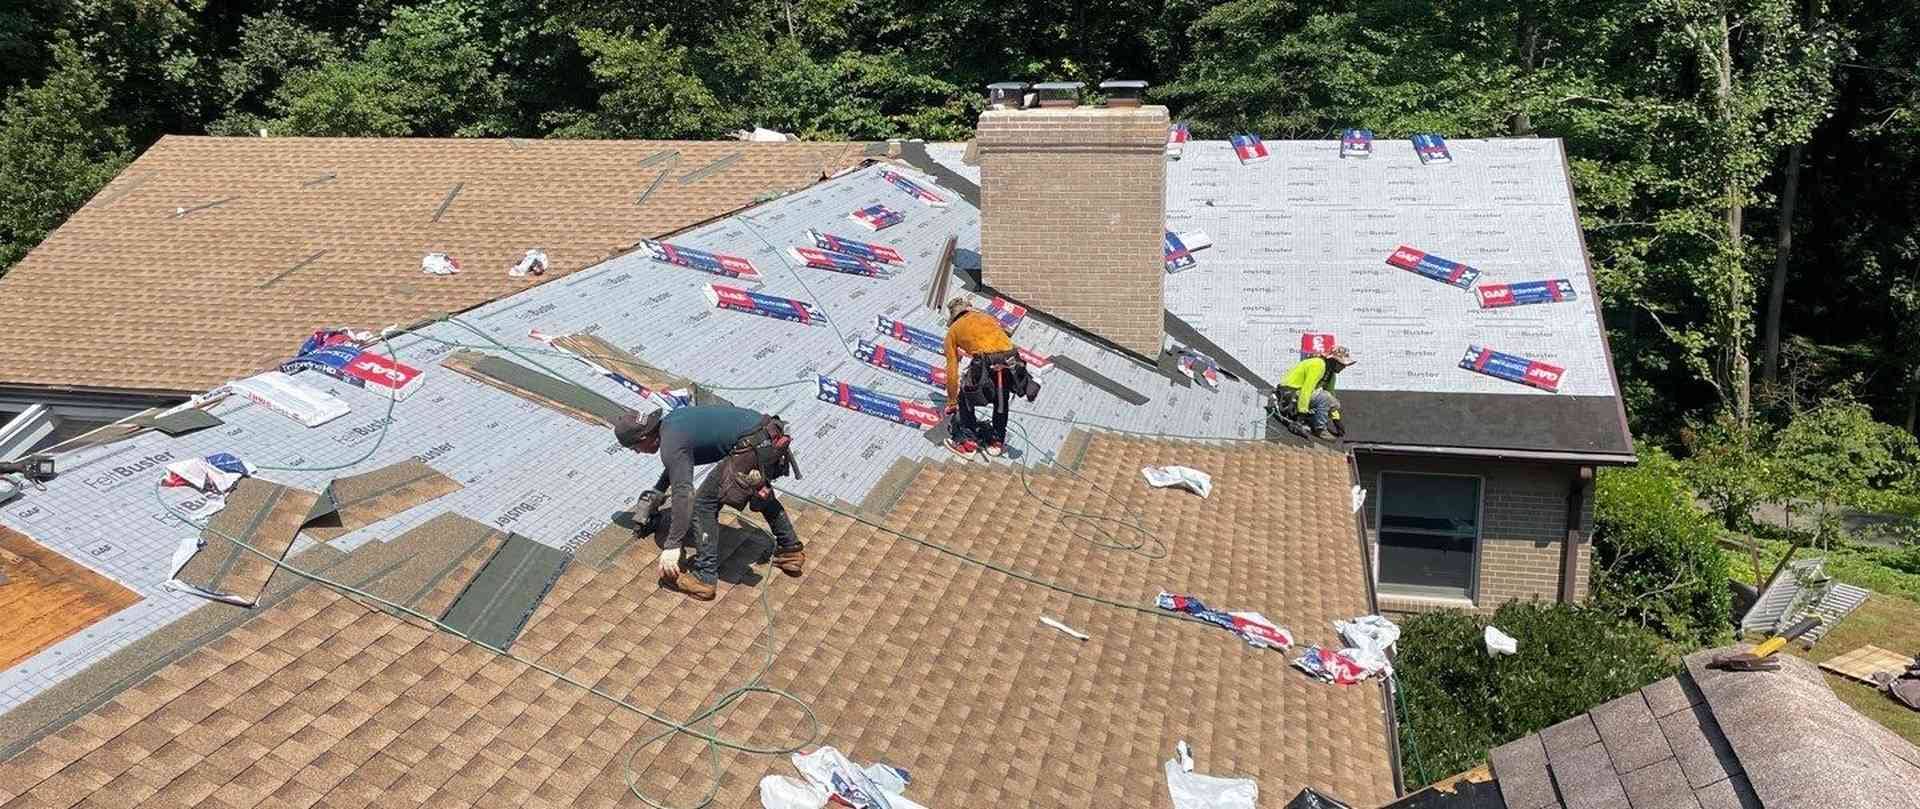 American Contracting And Roofing